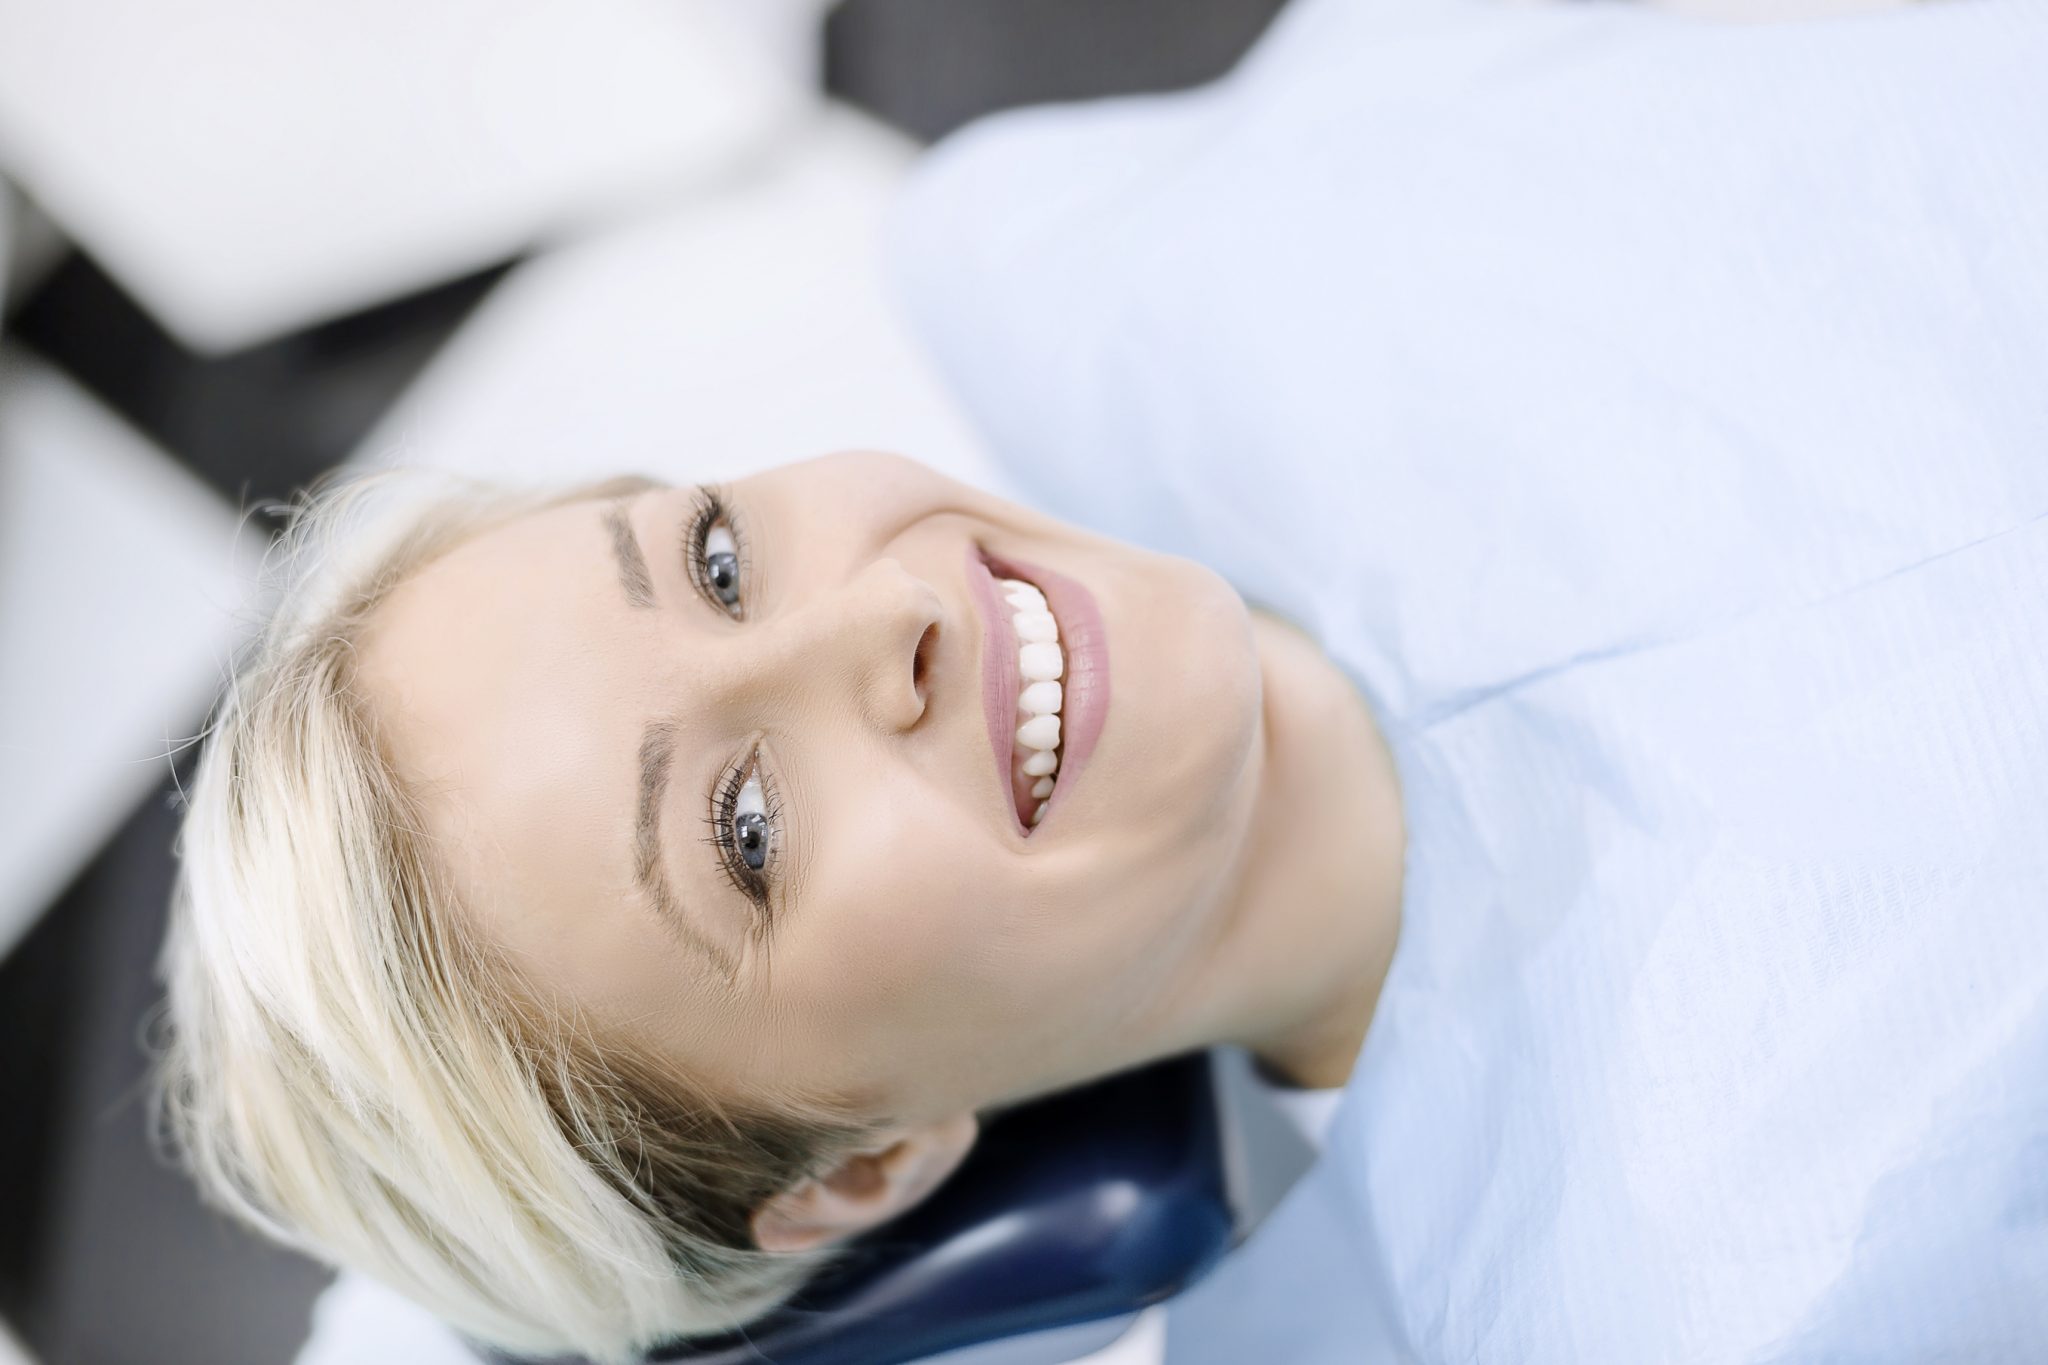 Woman smiling while getting her teeth professionally whitened by her dentist.